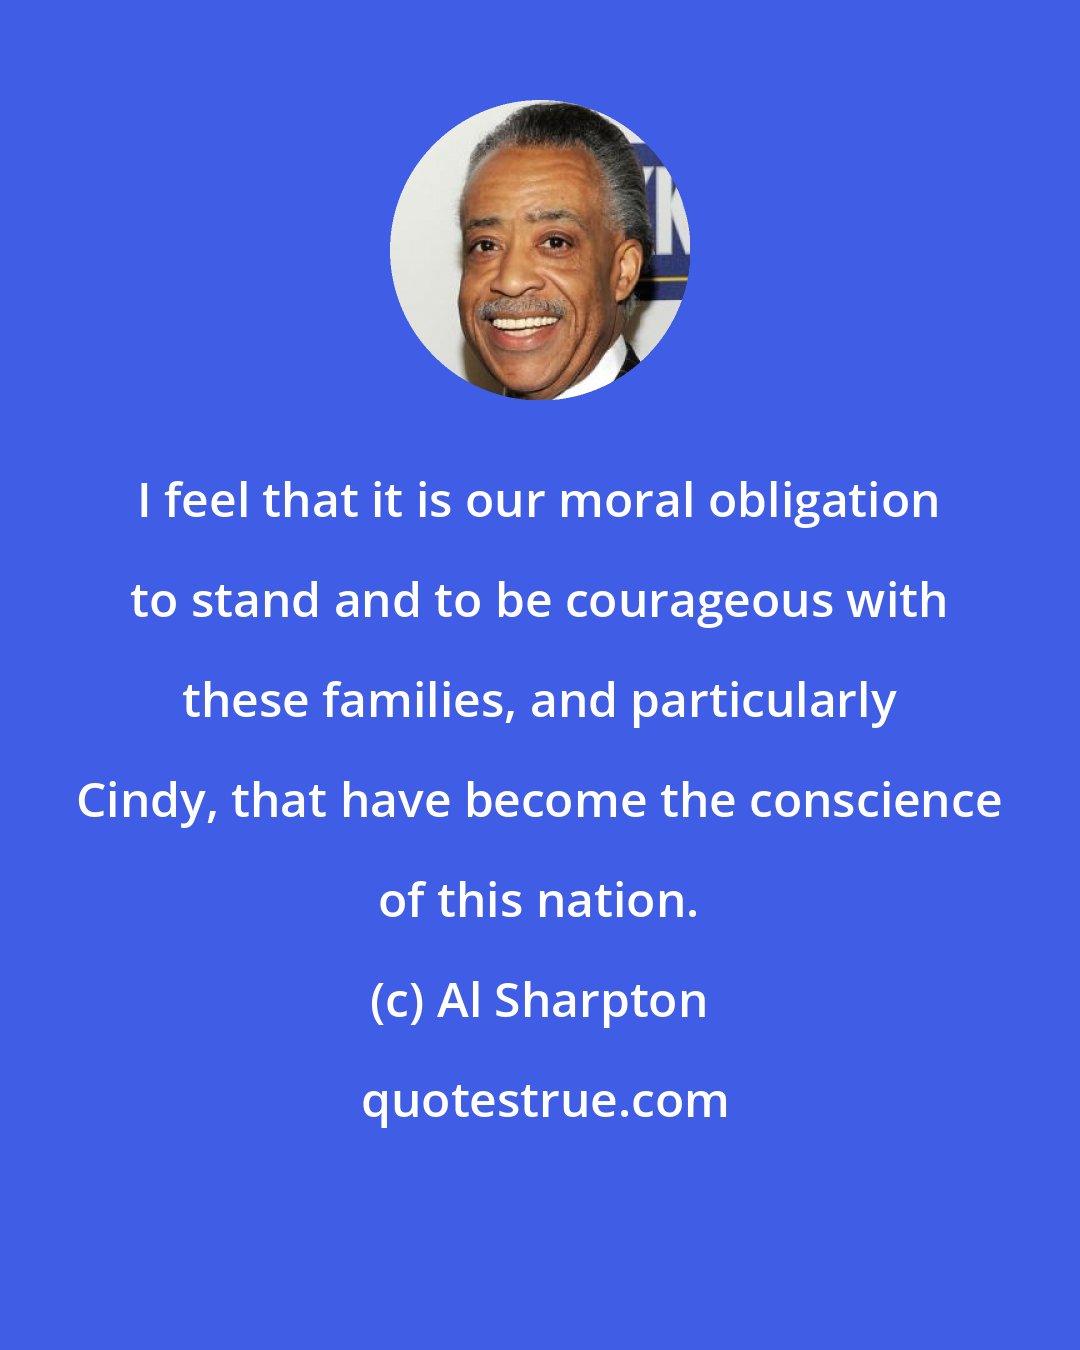 Al Sharpton: I feel that it is our moral obligation to stand and to be courageous with these families, and particularly Cindy, that have become the conscience of this nation.